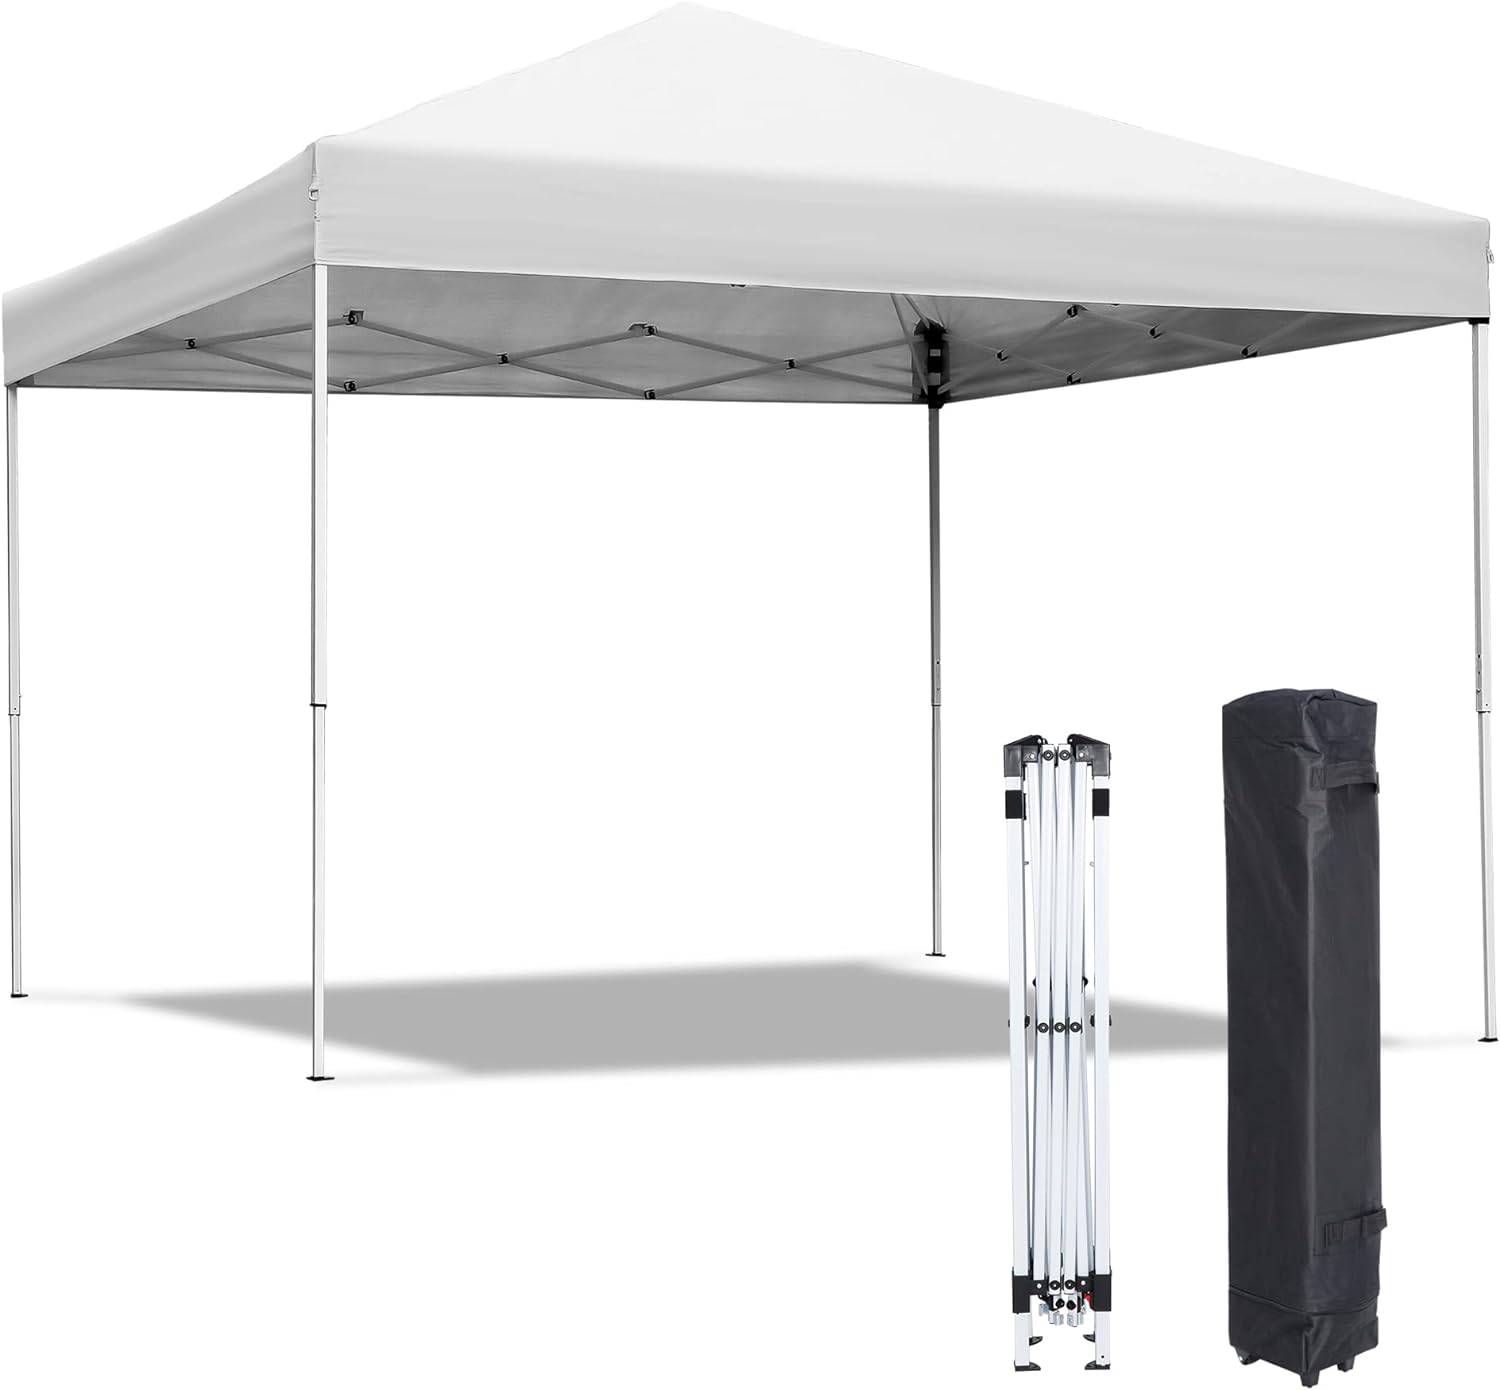 ZENY 10x10 Pop Up Canopy Tent Easy Set-up Outdoor Patio Canopy Adjustable Straight Leg Heights Instant Shelter with Wheeled Bag, Ropes